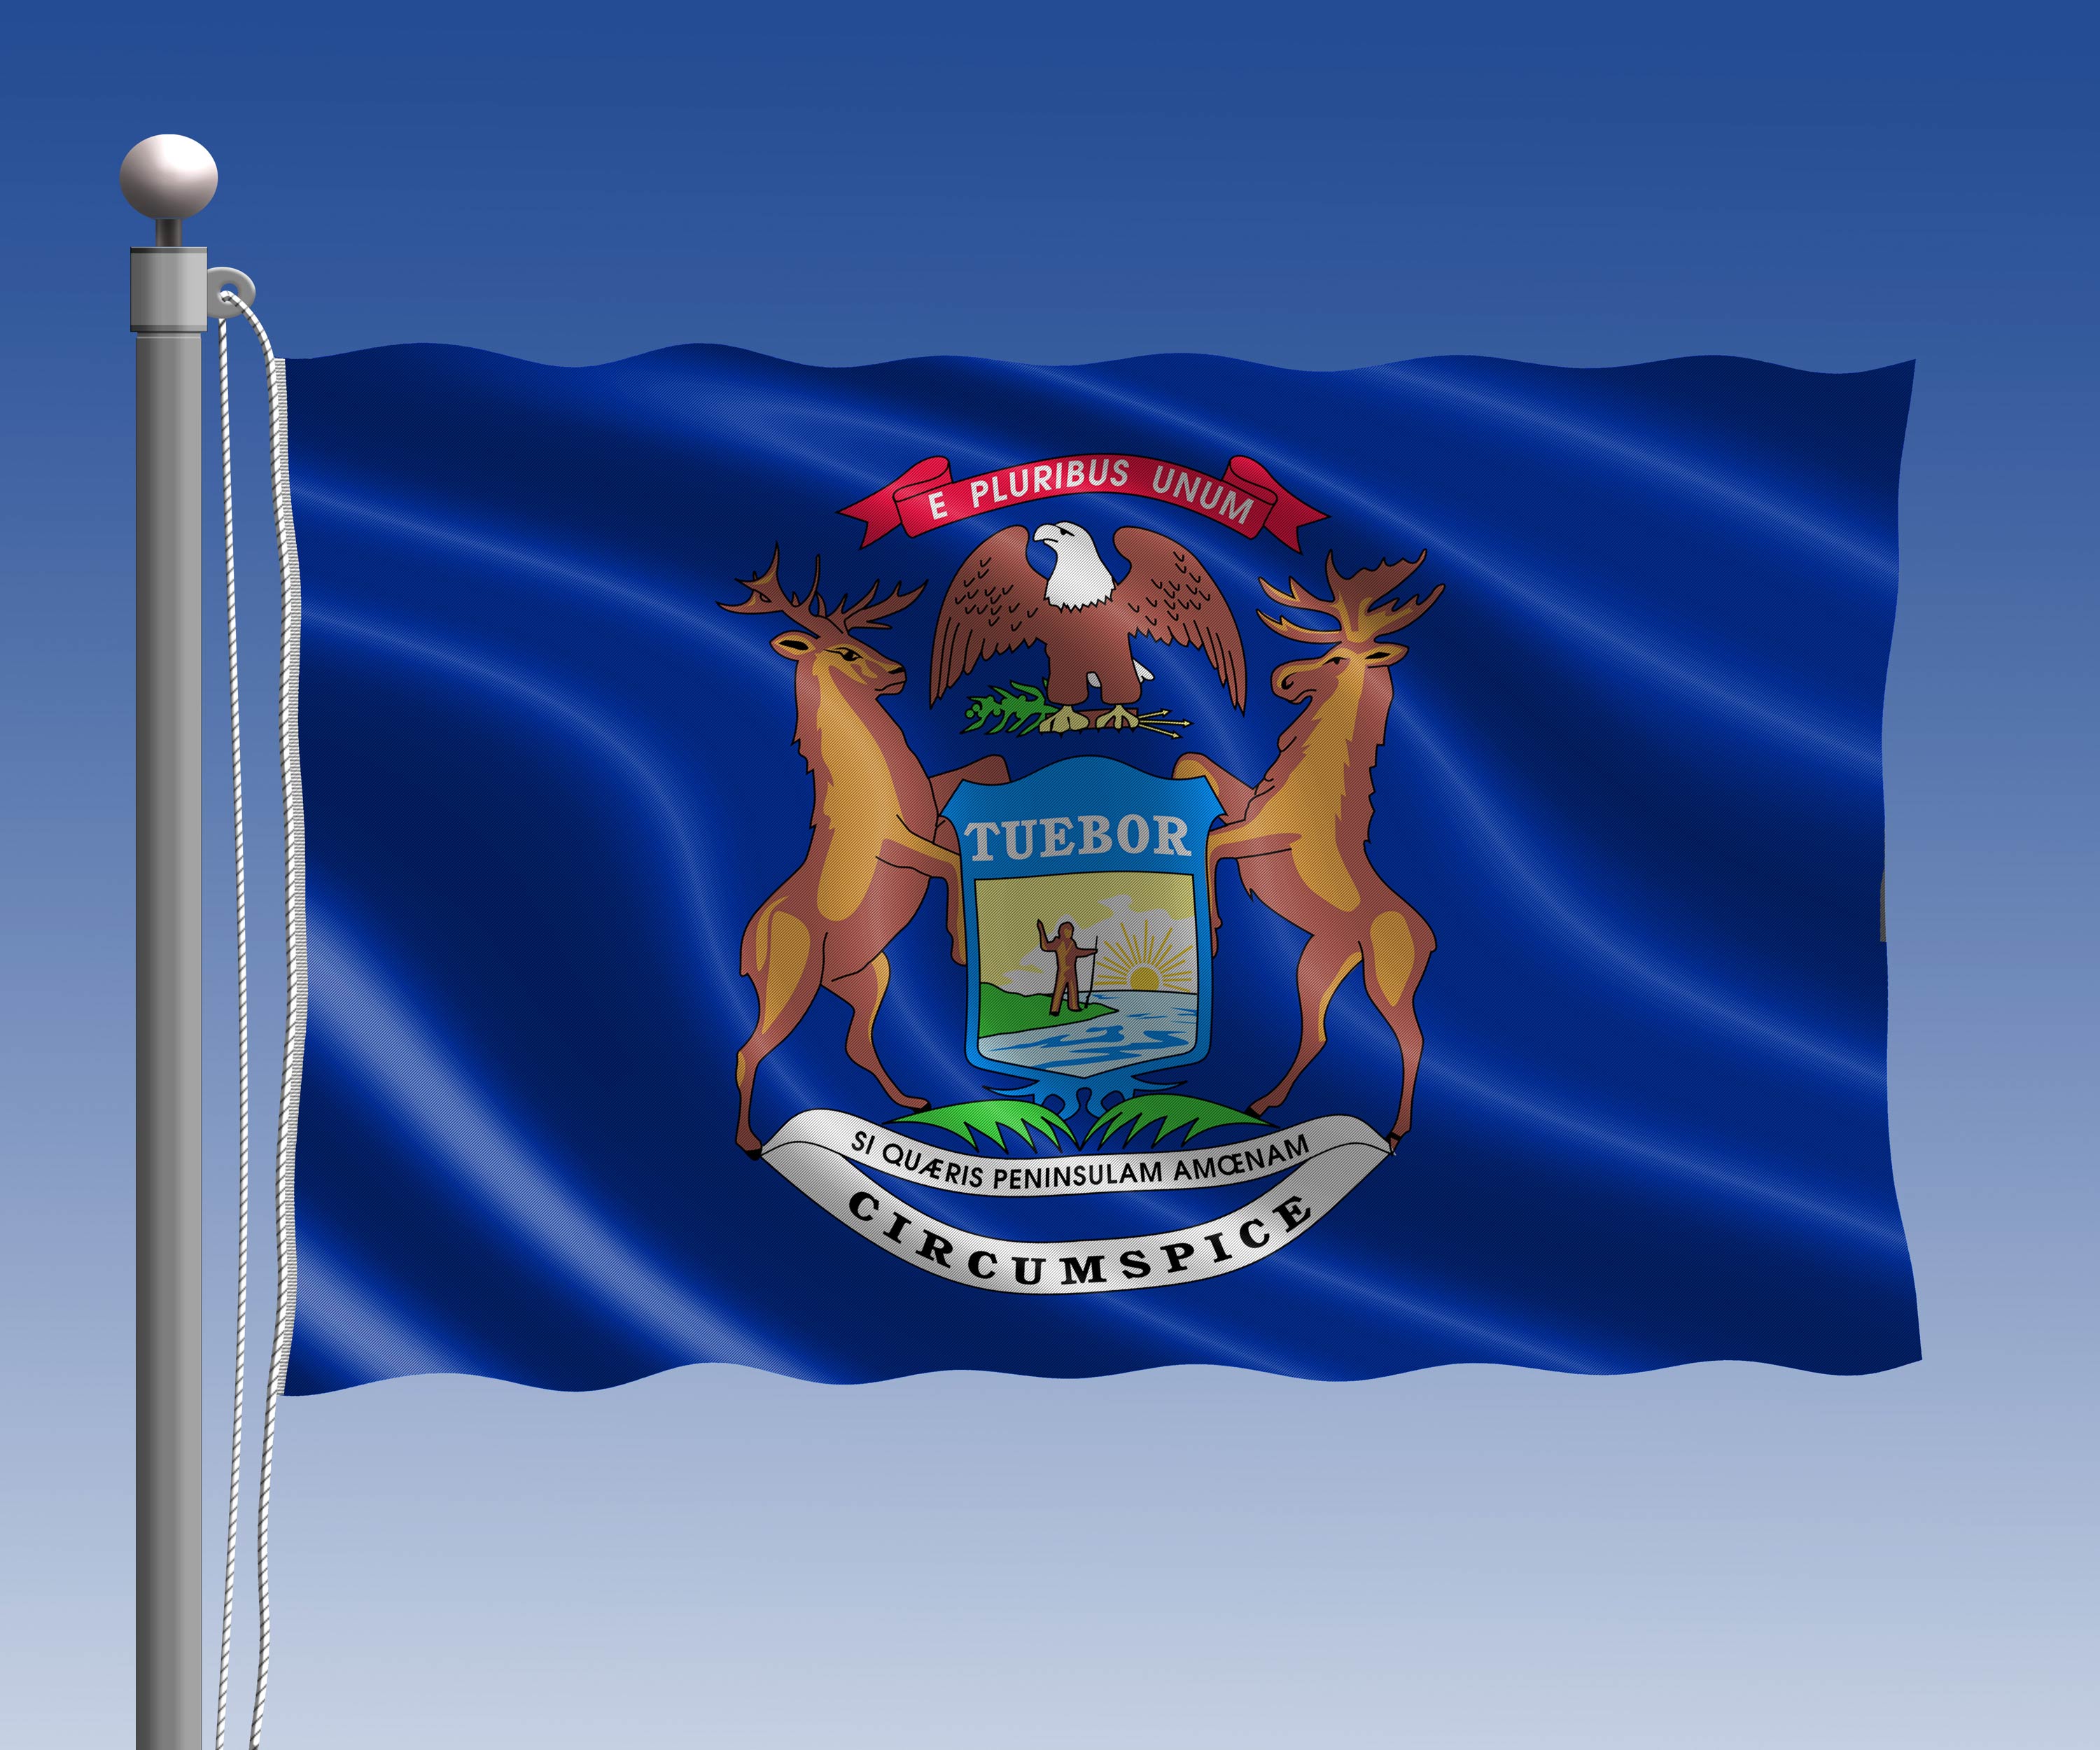 A flag of the state of Michigan